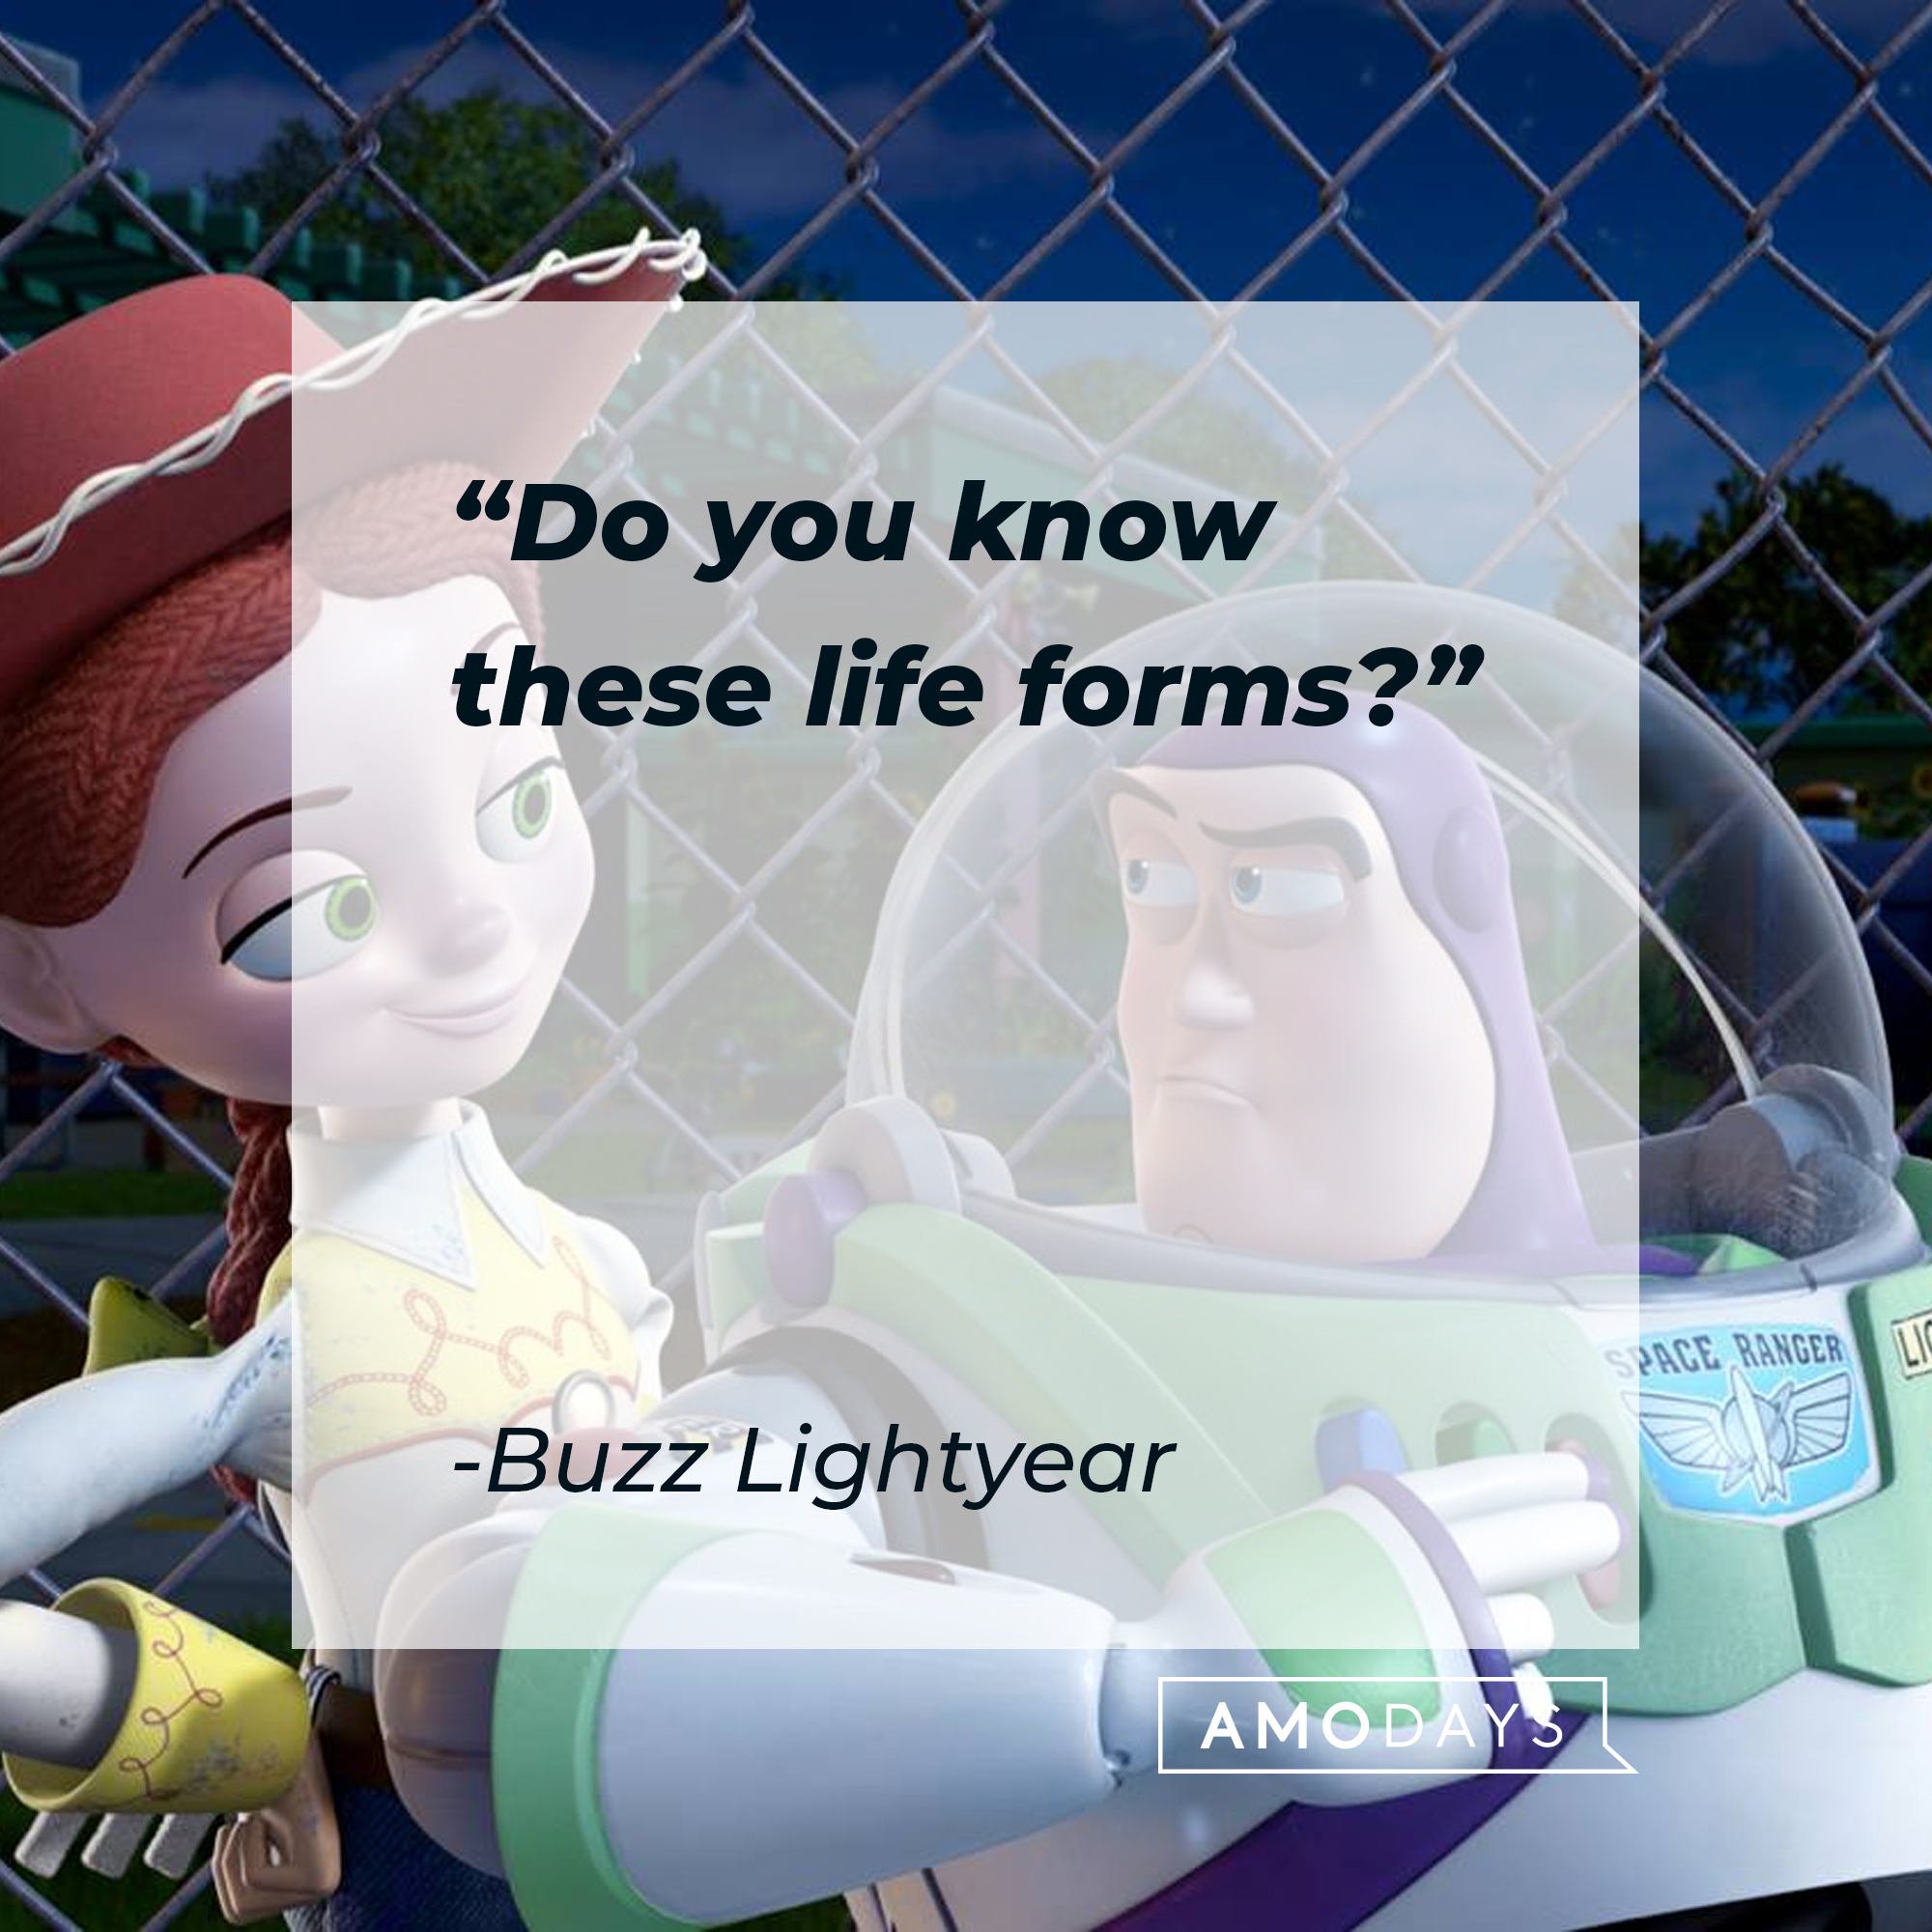 Buzz Lightyear's quote: "Do you know these life forms?" | Source: Facebook/BuzzLightyear